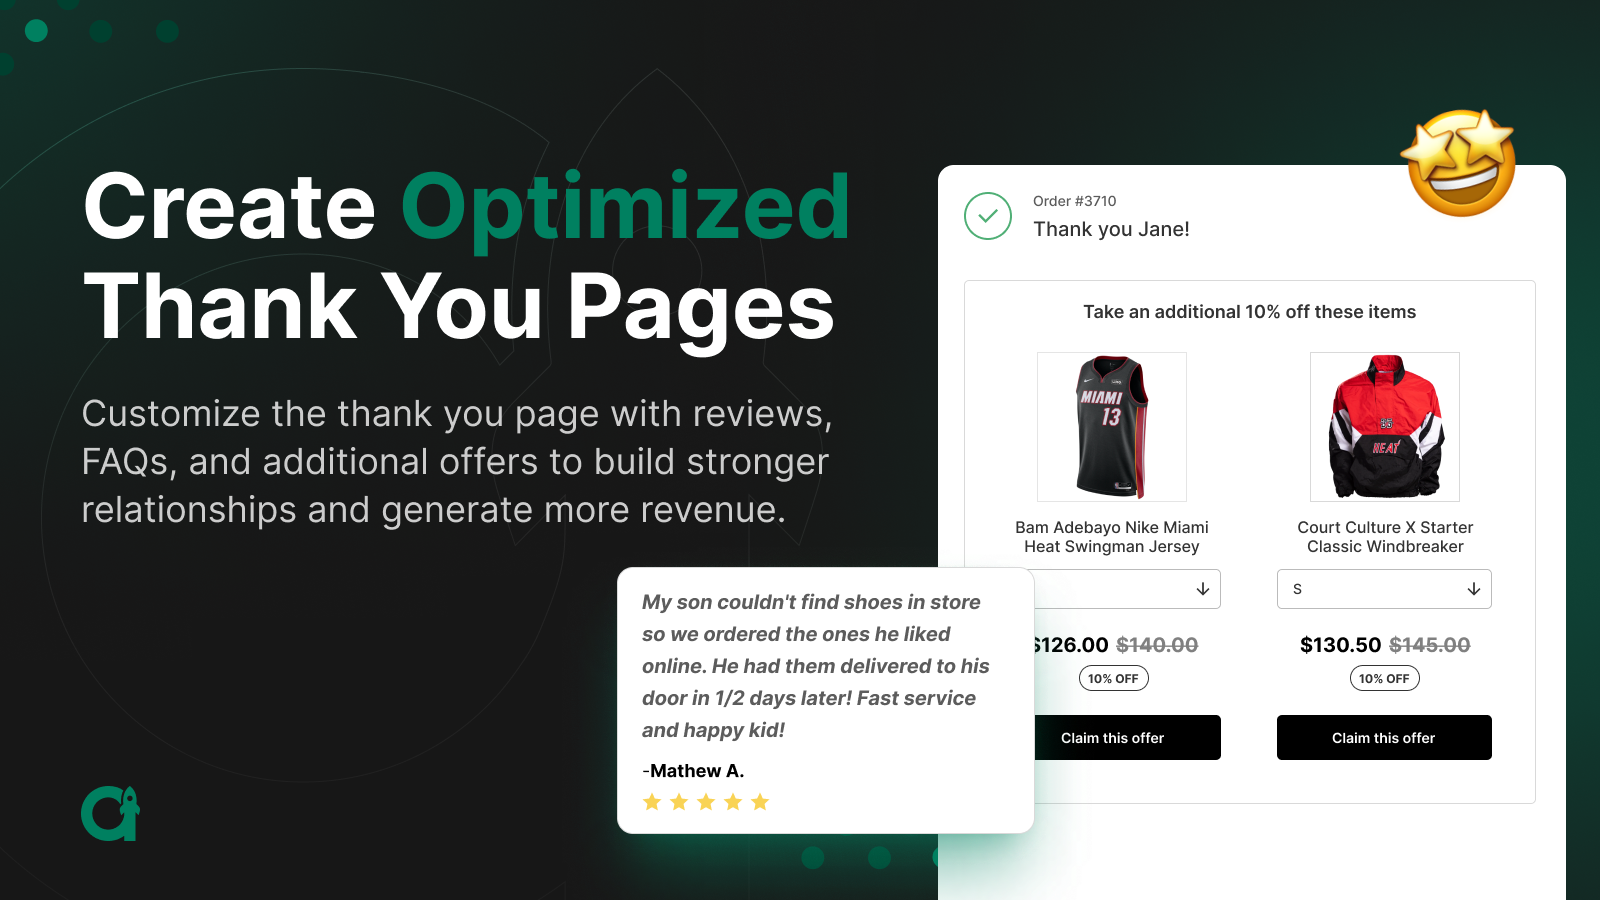 Create Optimized Thank You Pages